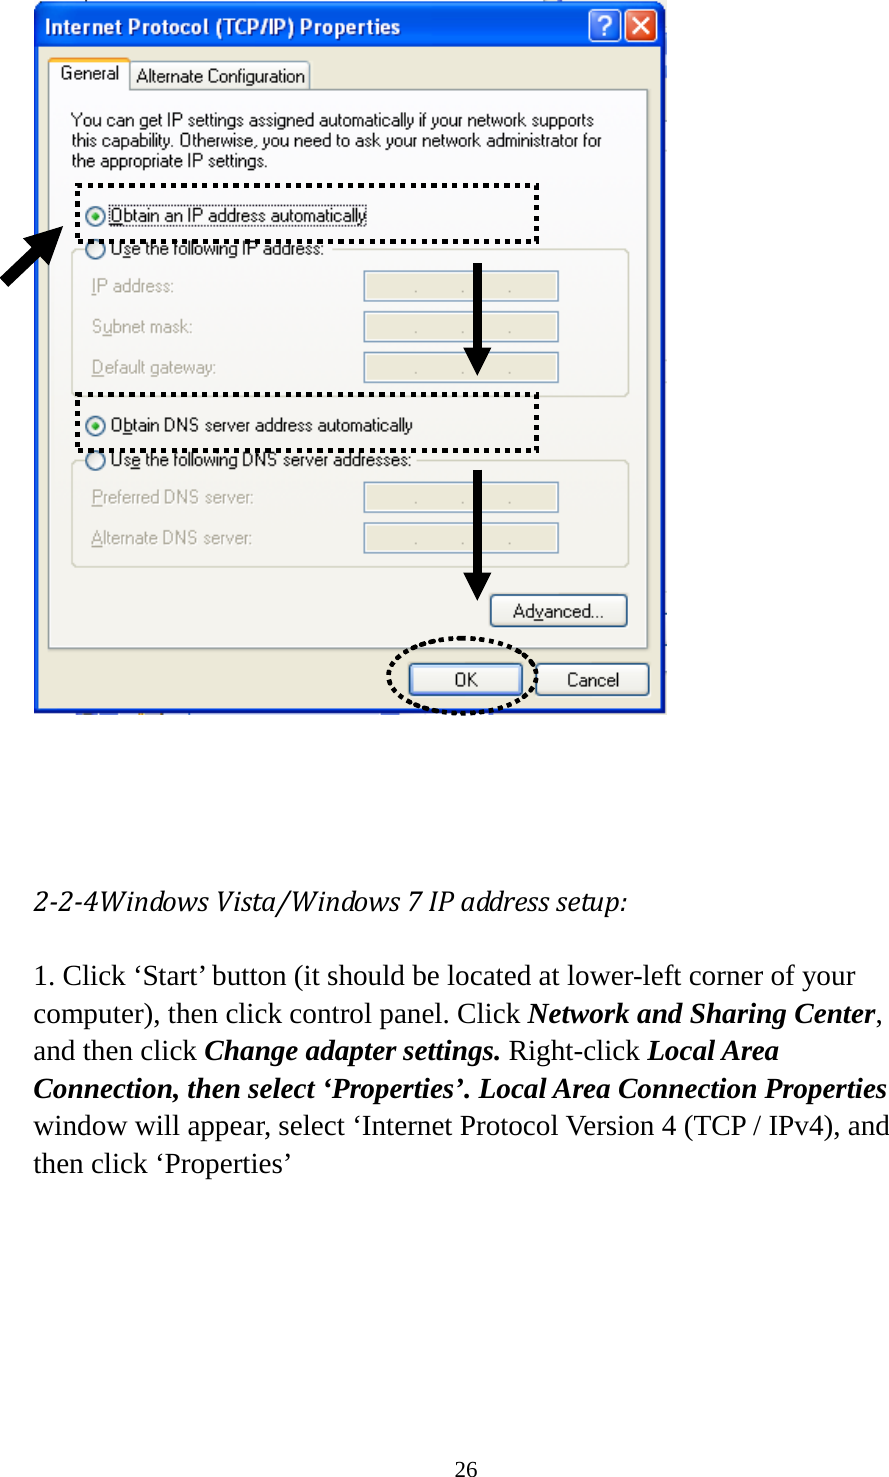 26     2-2-4Windows Vista/Windows 7 IP address setup: 1. Click ‘Start’ button (it should be located at lower-left corner of your computer), then click control panel. Click Network and Sharing Center, and then click Change adapter settings. Right-click Local Area Connection, then select ‘Properties’. Local Area Connection Properties window will appear, select ‘Internet Protocol Version 4 (TCP / IPv4), and then click ‘Properties’  